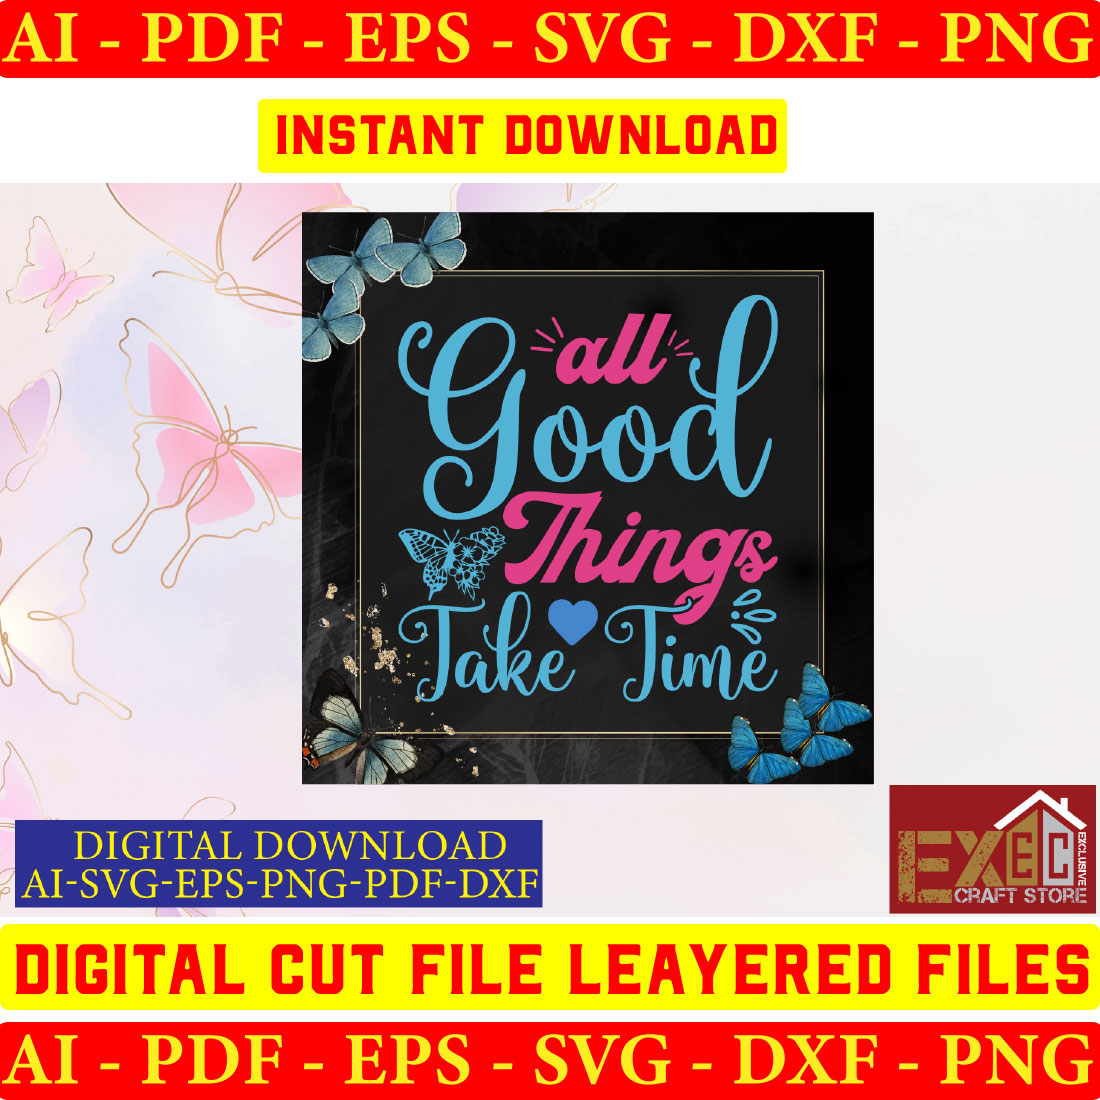 Digital cut file layered files for svg.